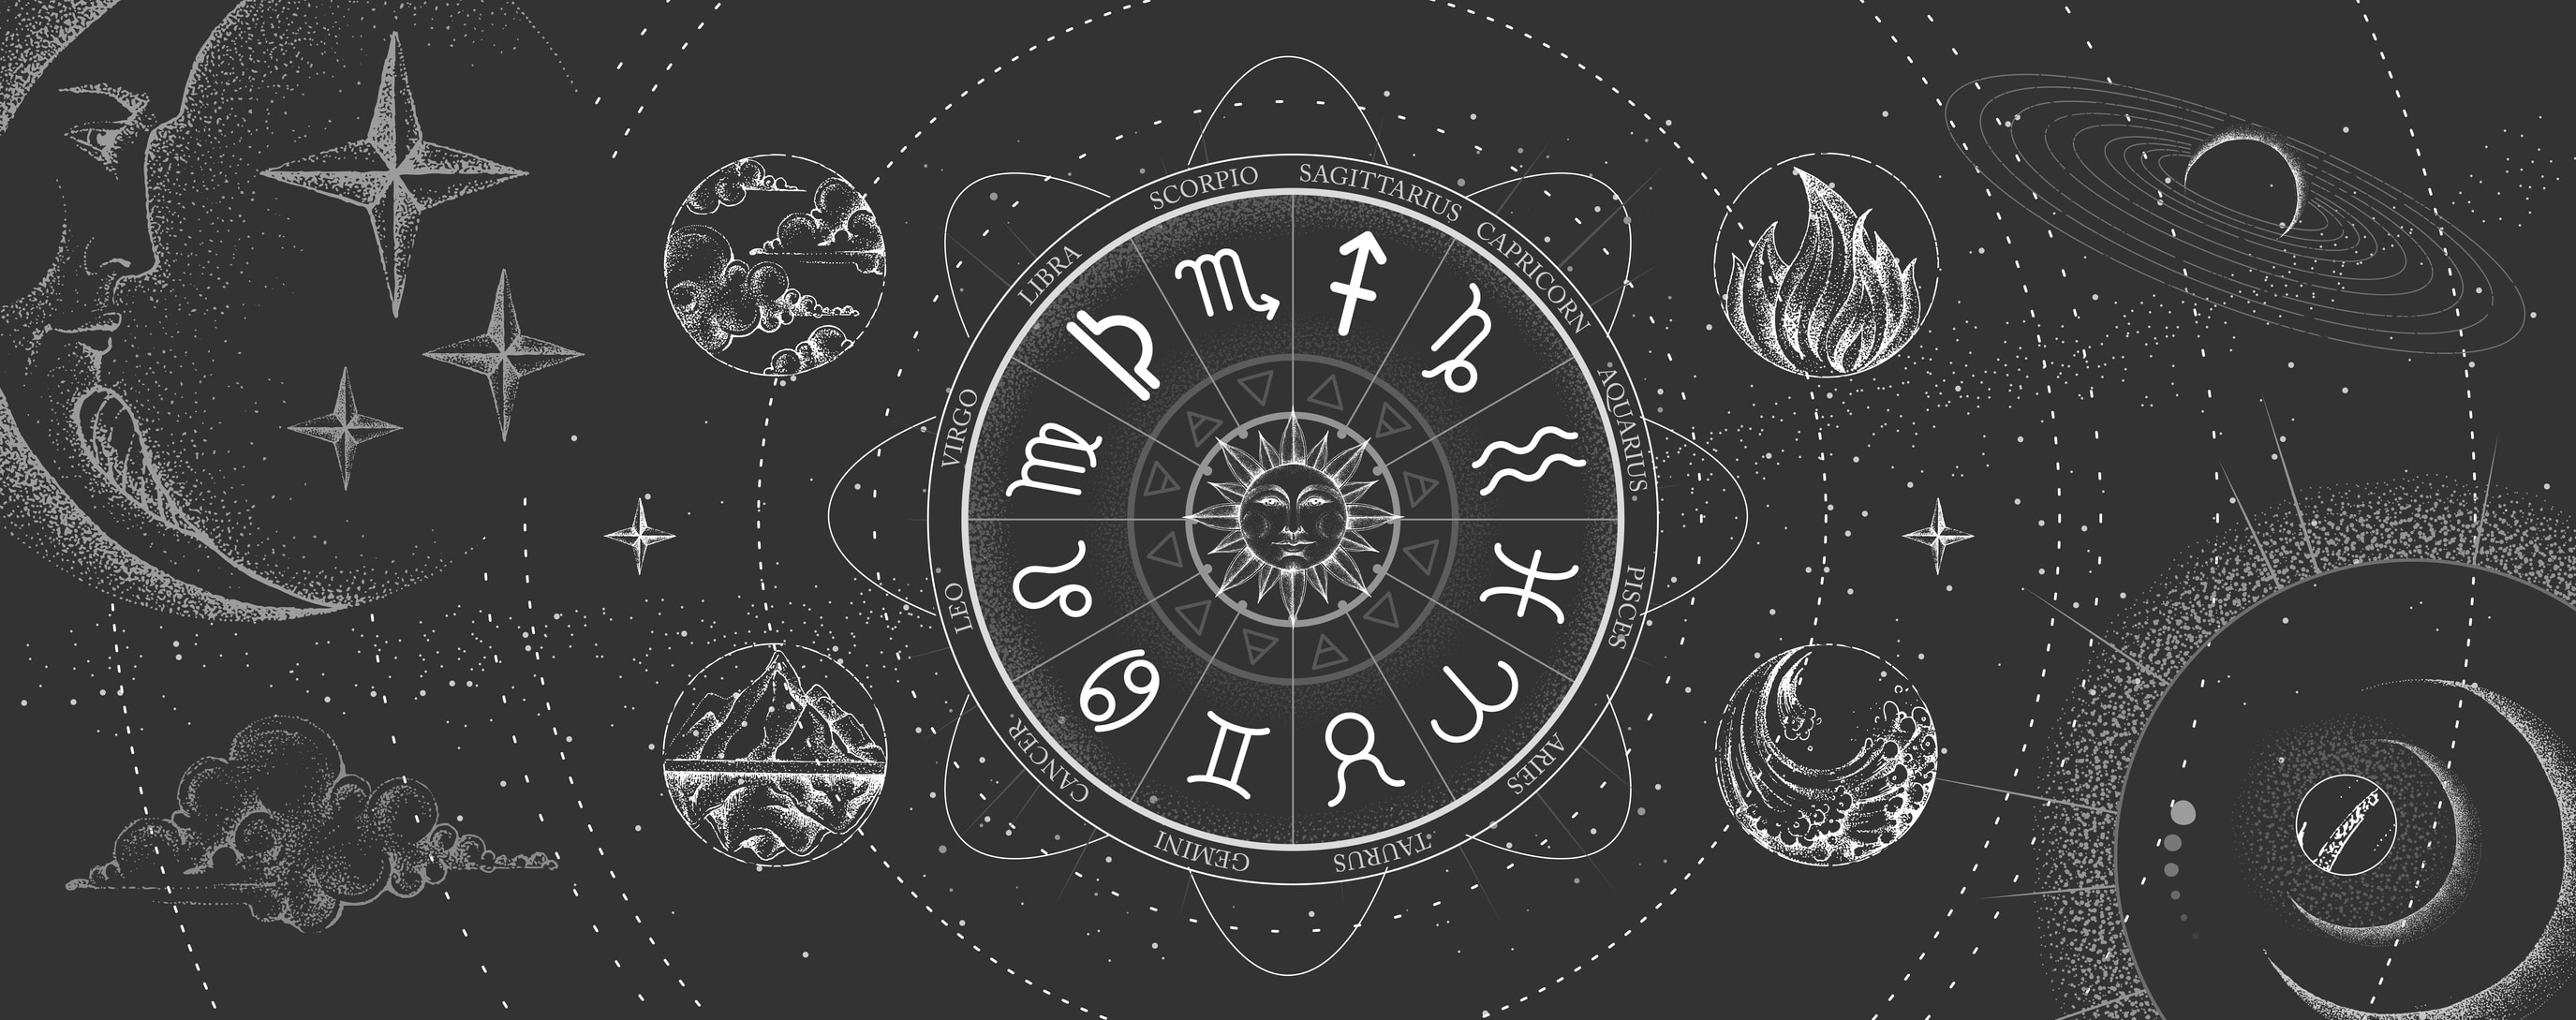 An astrological wheel with zodiac signs - Capricorn, Cancer, Pisces